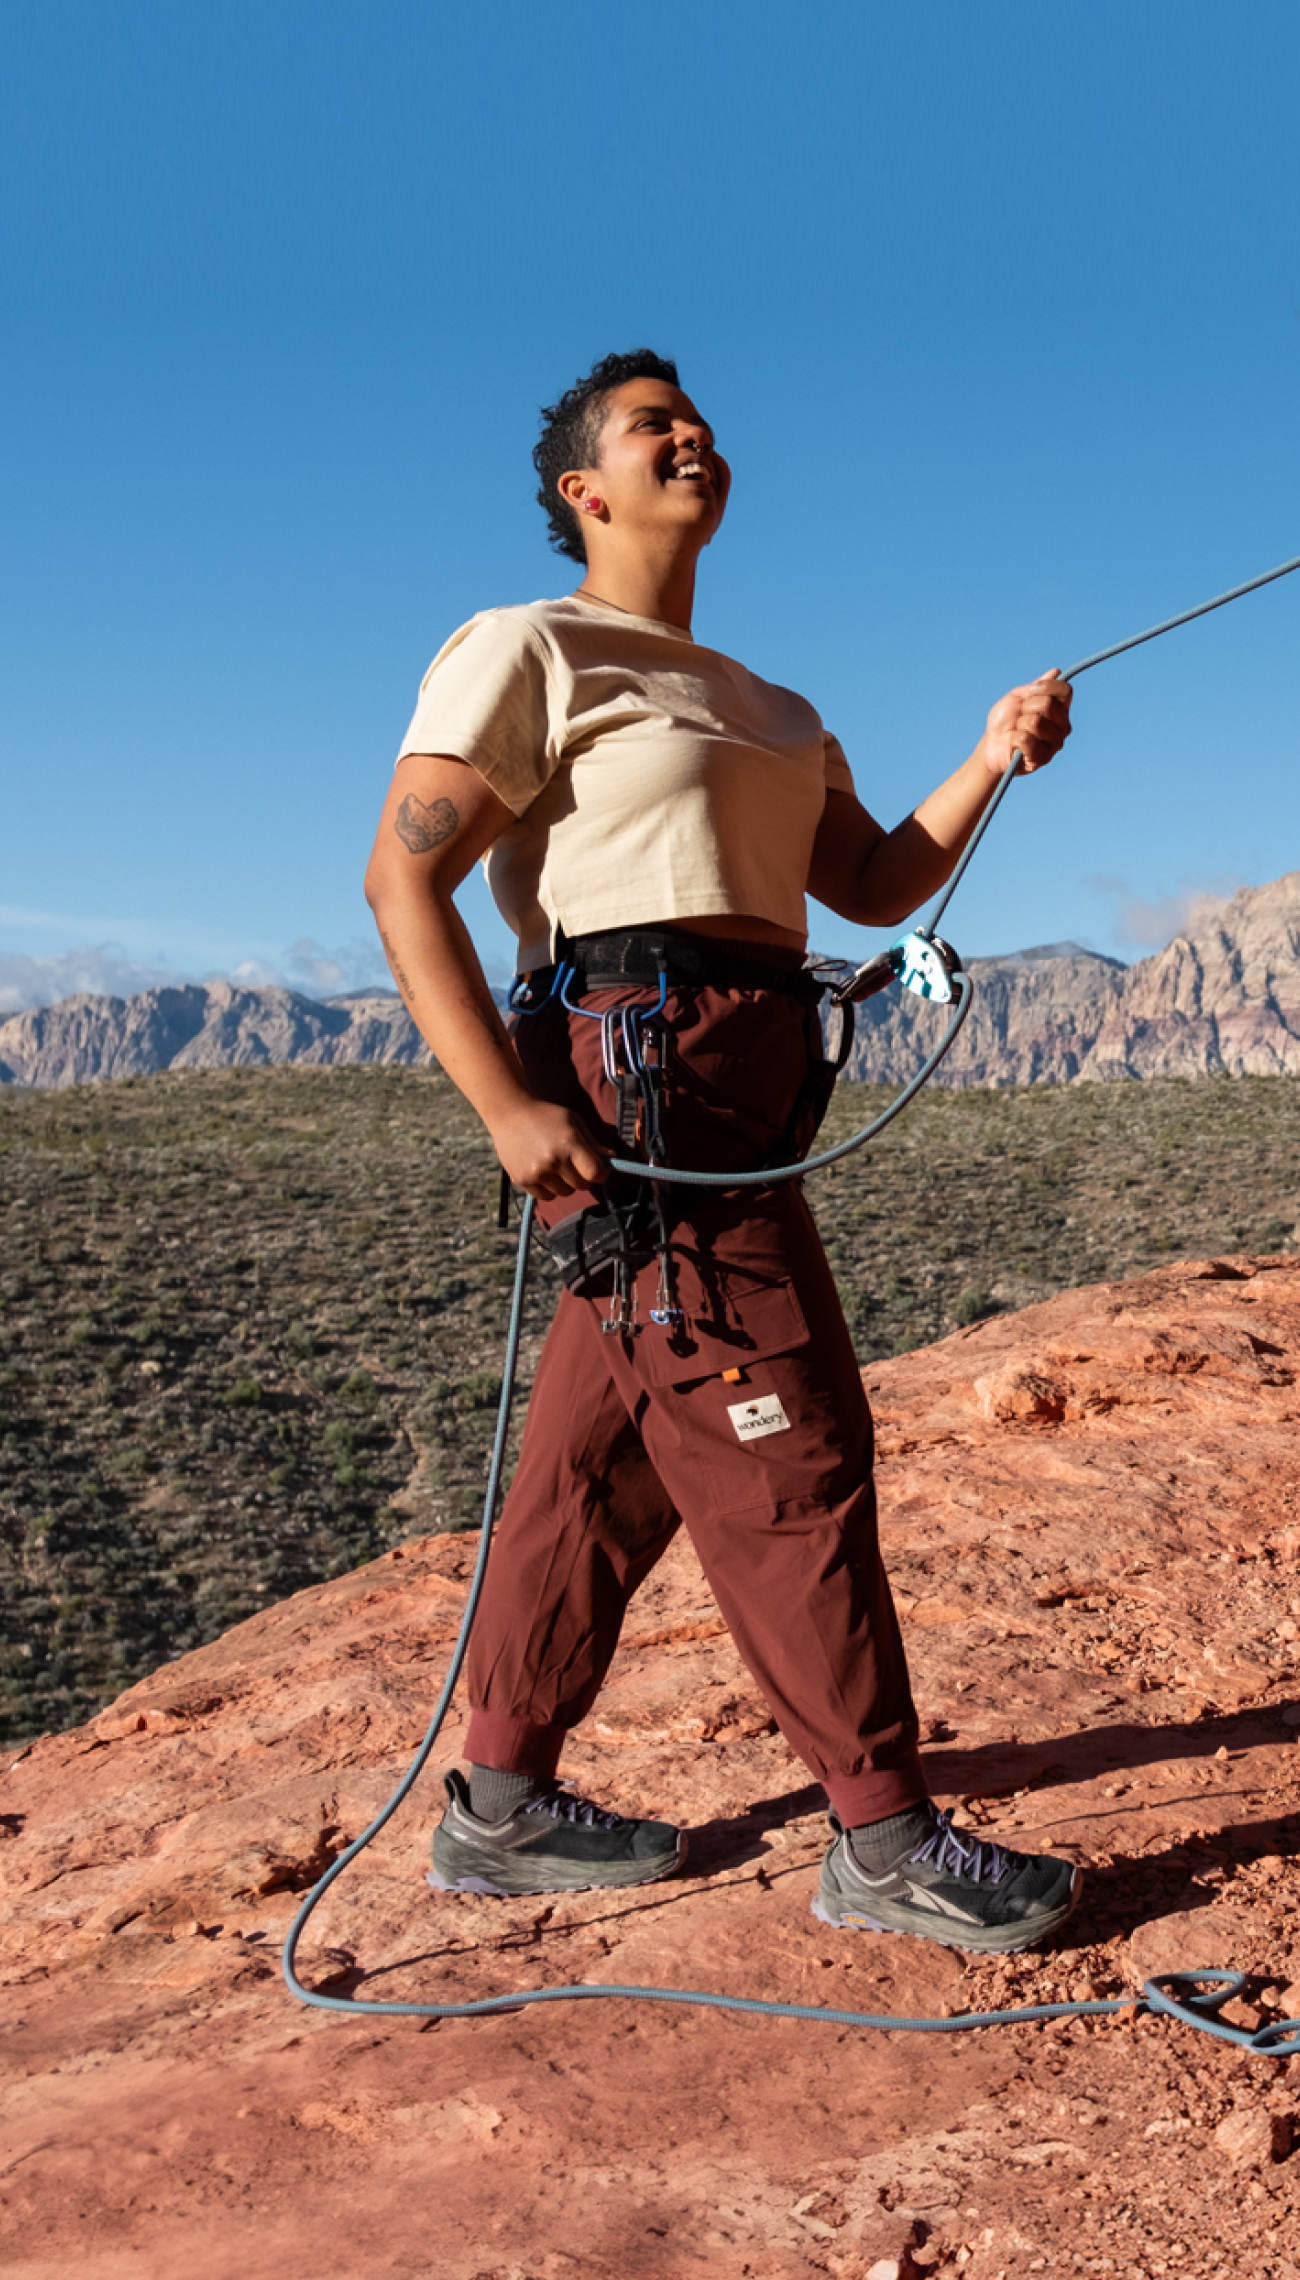 Tall woman with short hair, sand colored crop top and climbing pants preparing to climb a red rock with her climbing gear